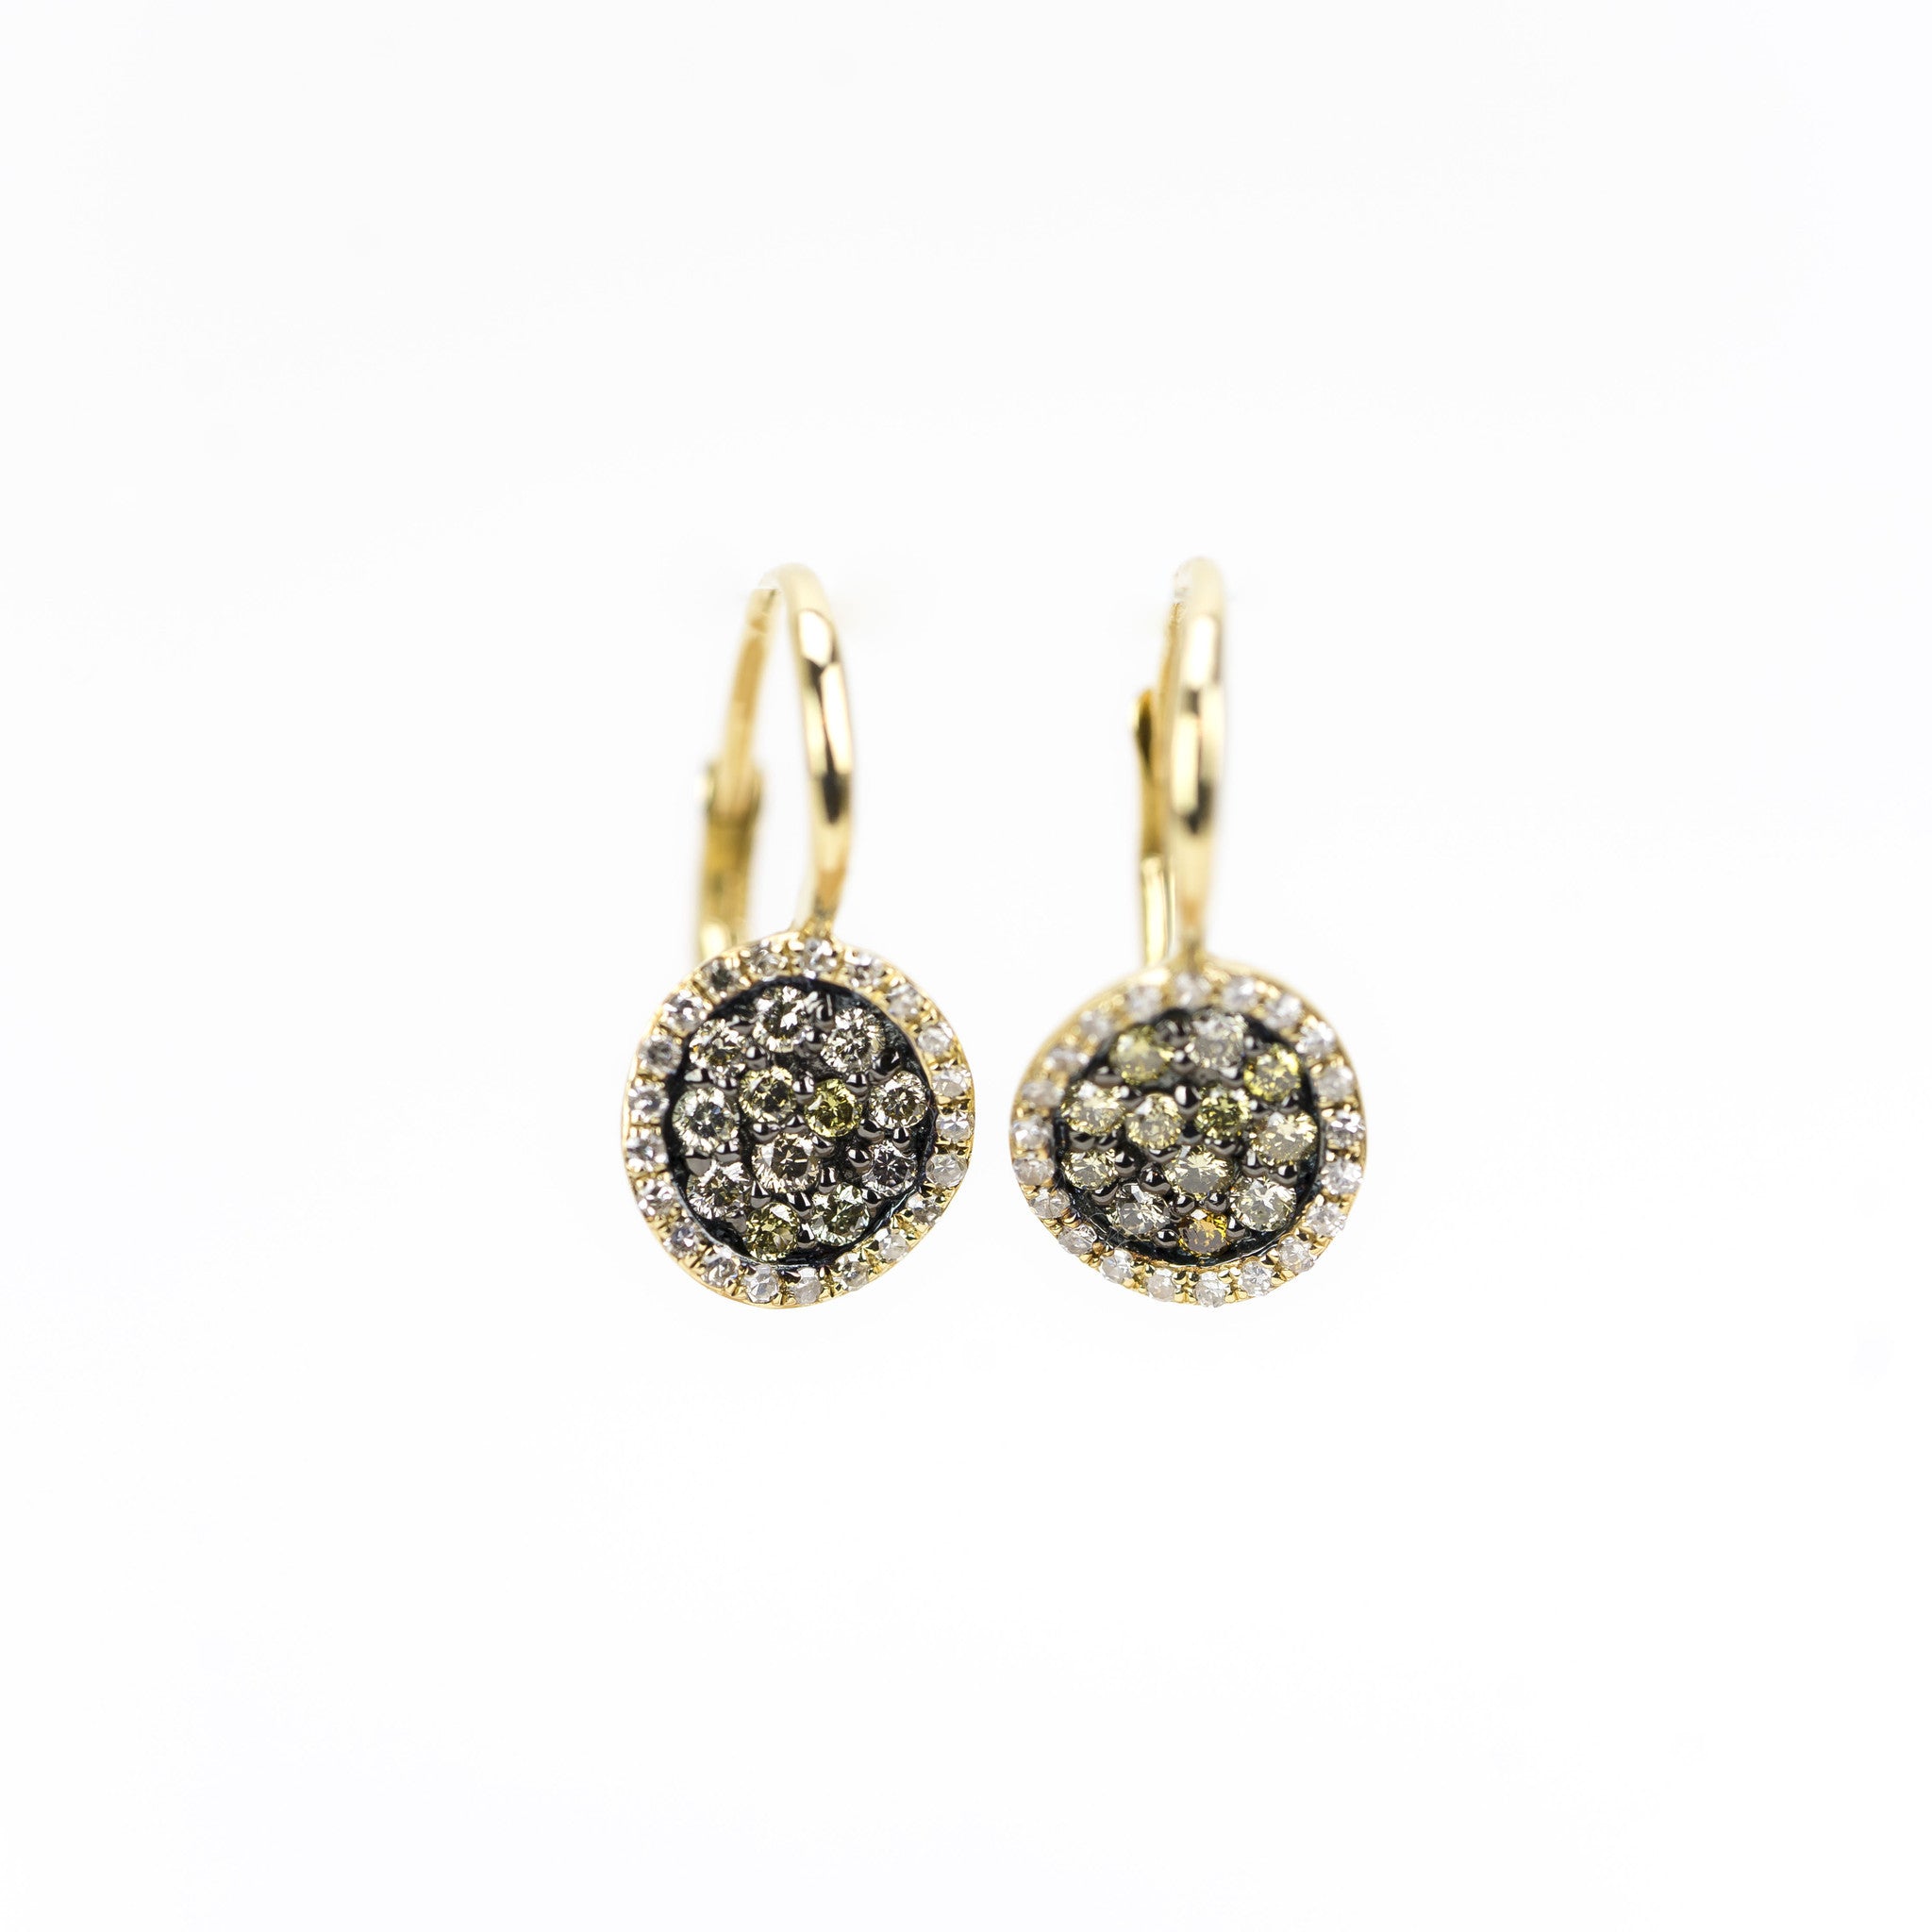 Champagne and White Diamond Meteorite Earrings by Atheria Jewelry